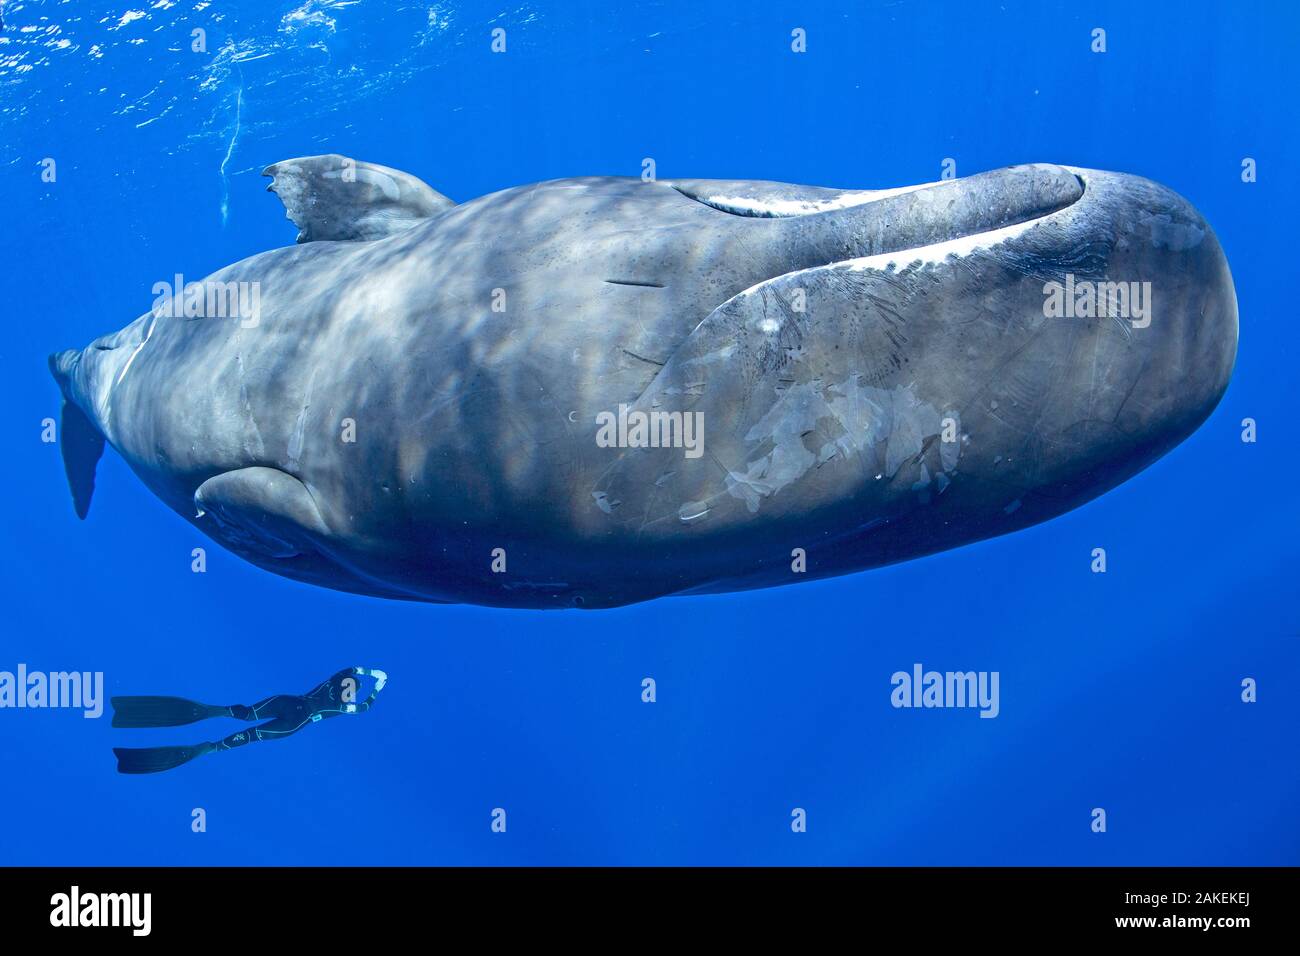 Sperm whale (Physeter macrocephalus) with a free diver swimming, Dominica, Caribbean Sea, Atlantic Ocean, Vulnerable species. Stock Photo